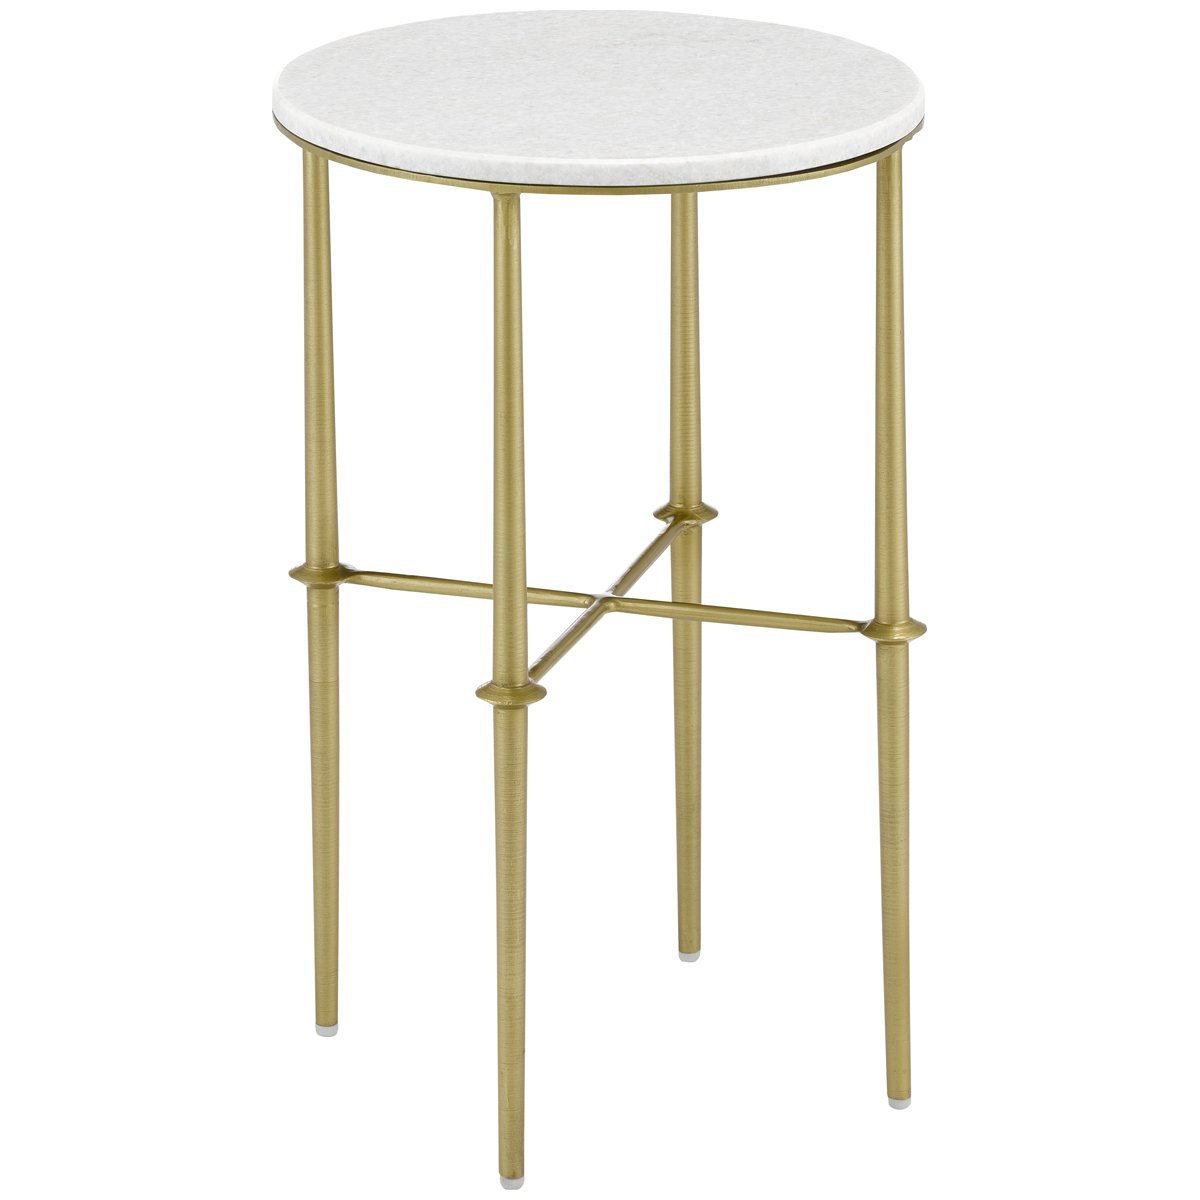 Currey and Company Kira Accent Table